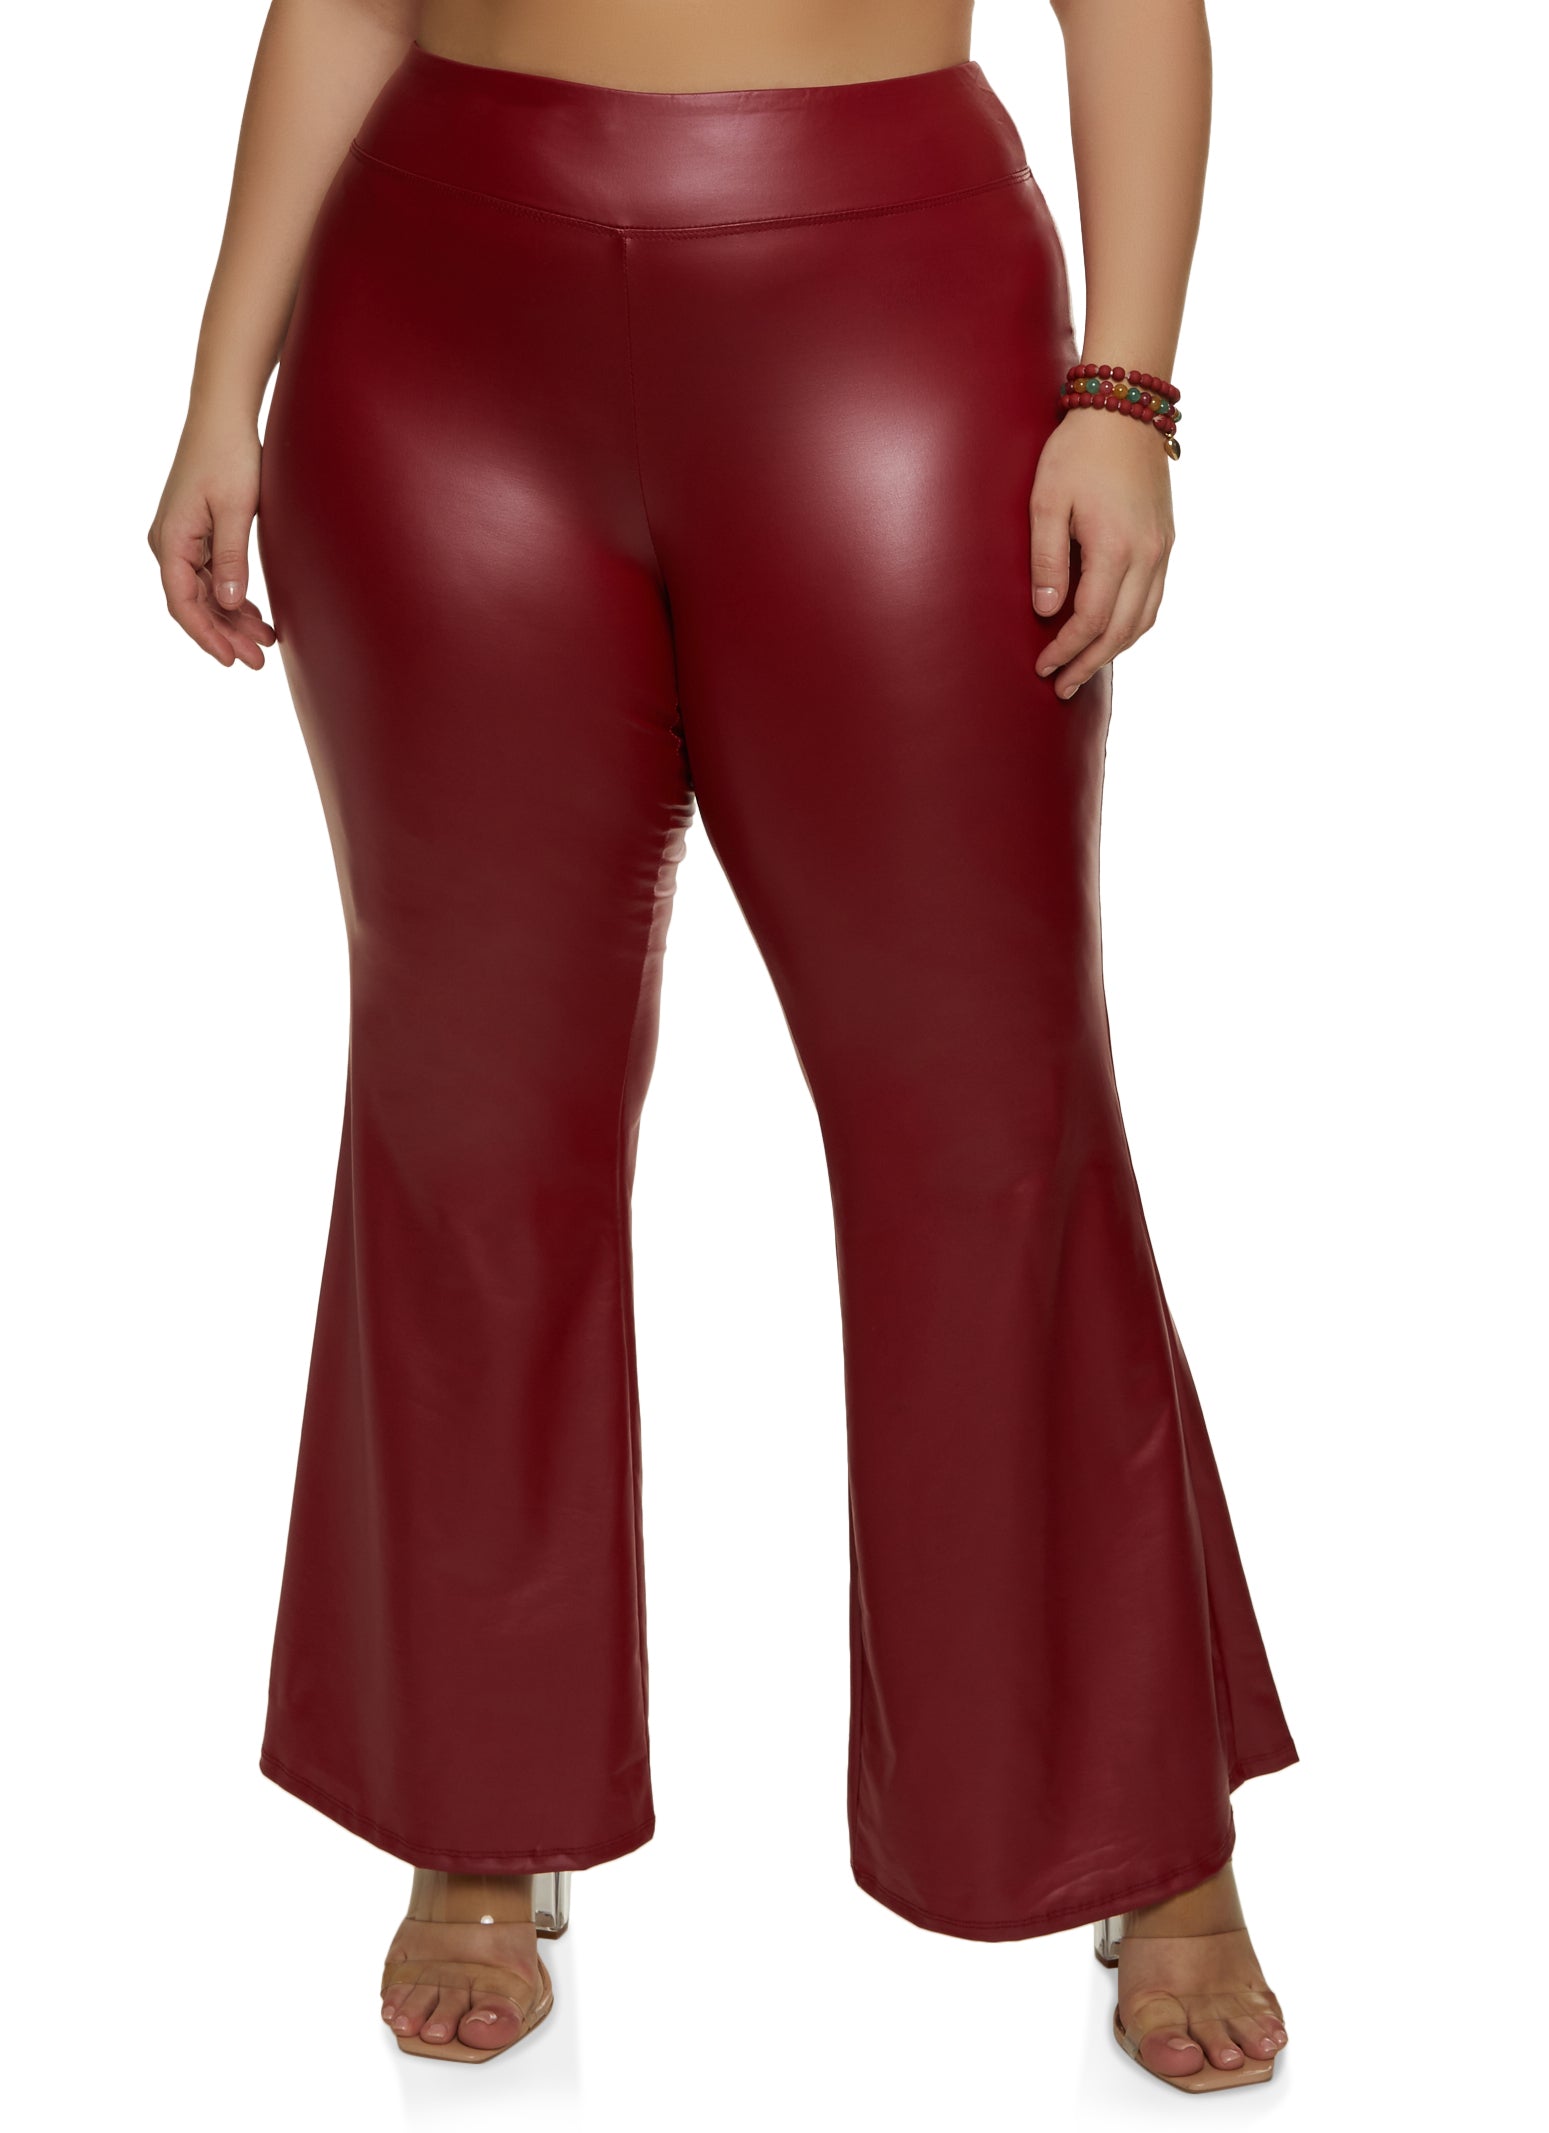 BUIgtTklOP Pants Women Plus Size High-waisted Leather Pants With Four-sided  Bottoms 